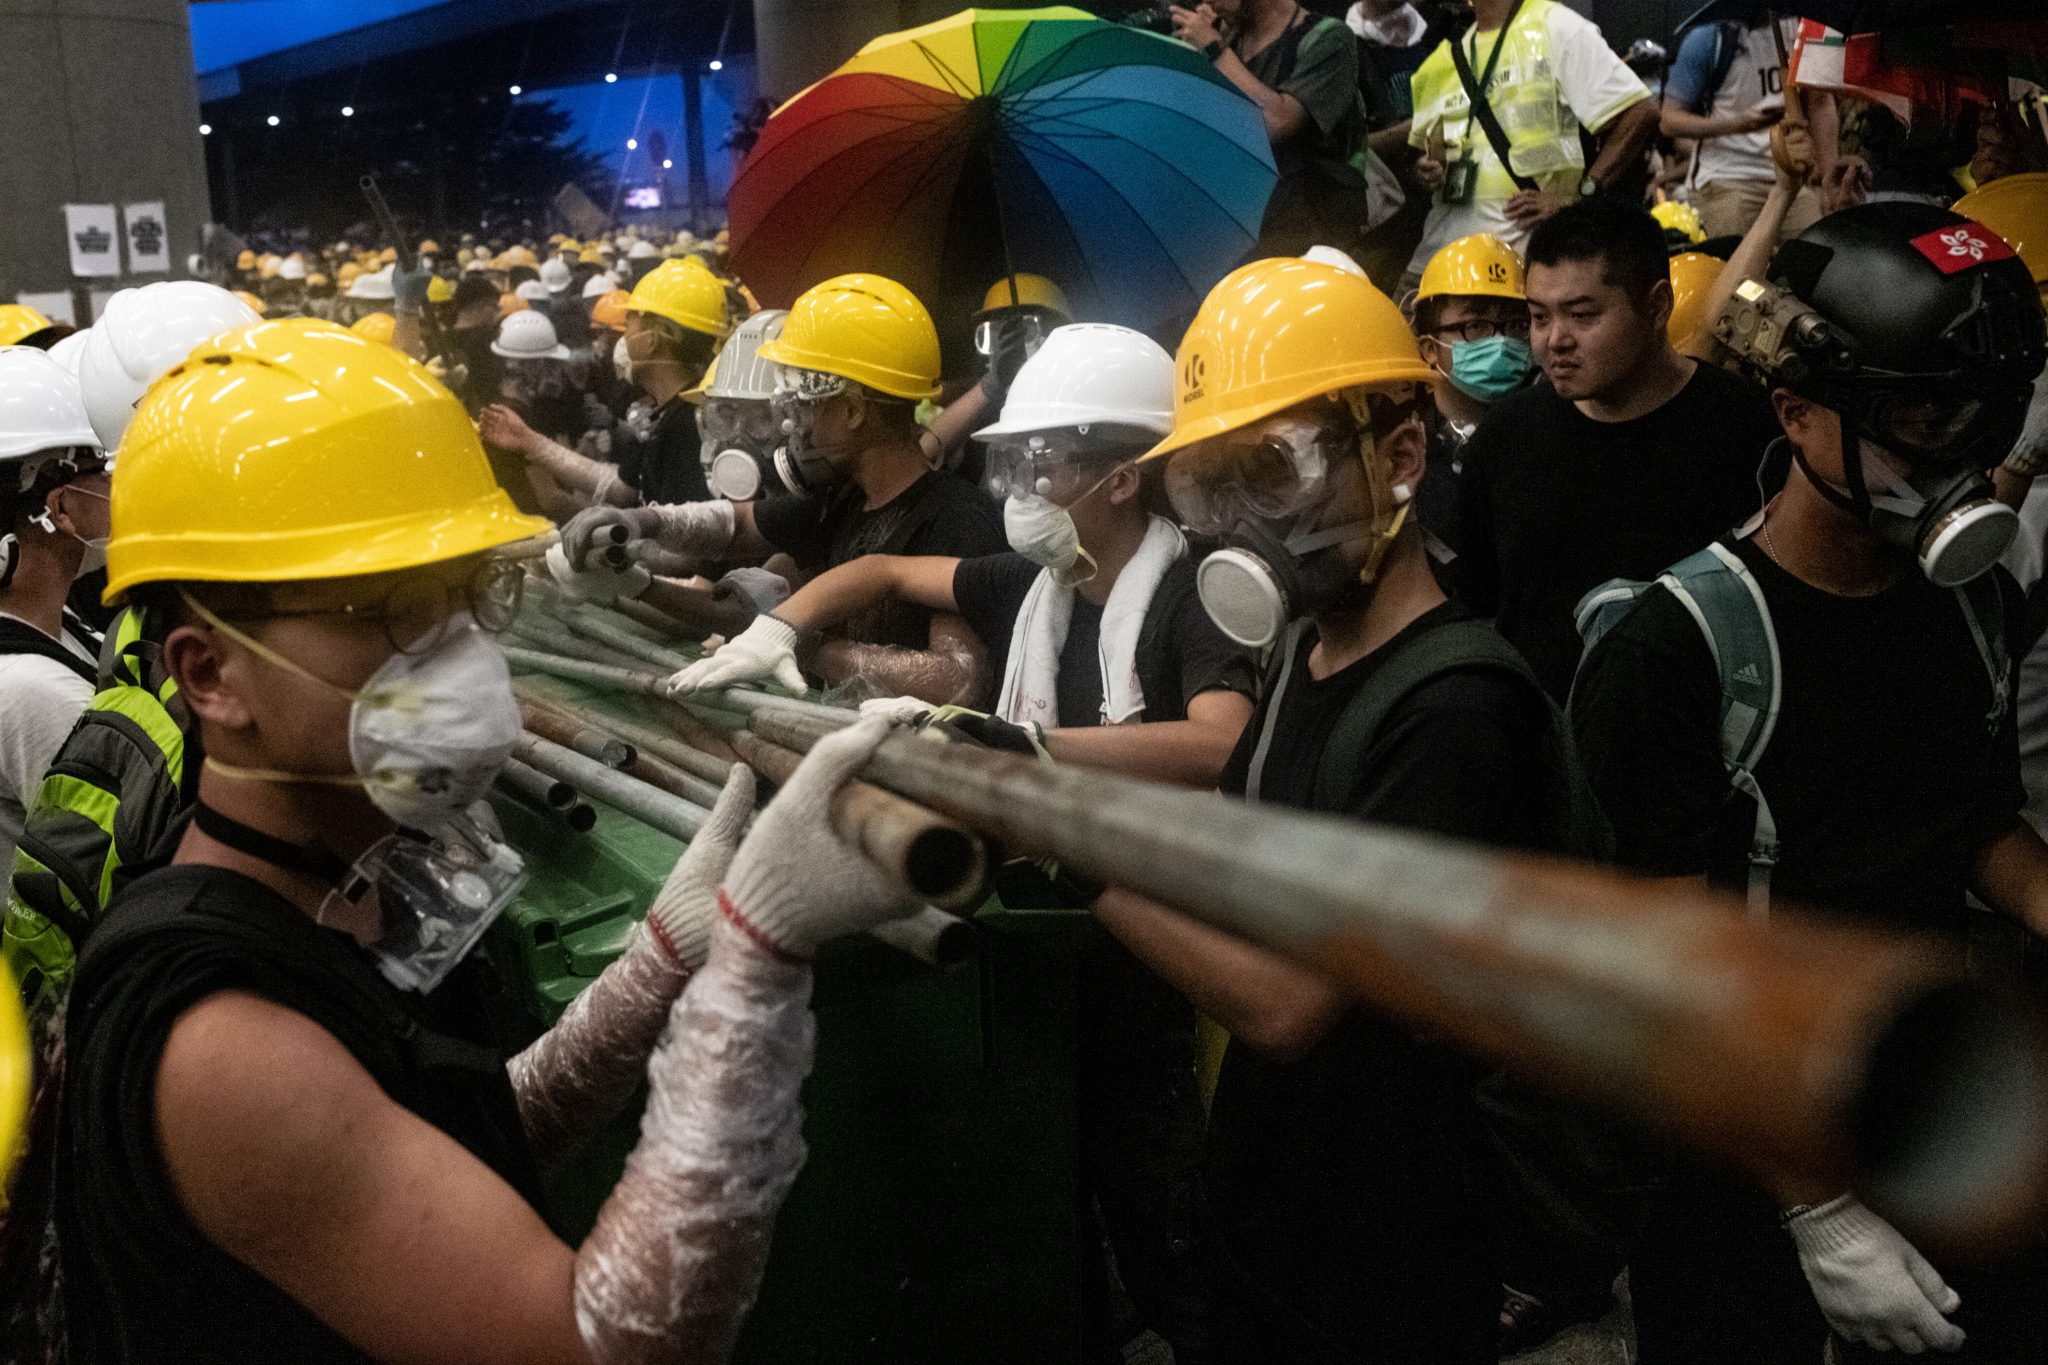 Foto: Philip FONG / AFP Protesters use metal rods to smash glass doors and windows of the government headquarters in Hong Kong on July 1, 2019 on the 22nd anniversary of the city's handover from Britain to China. - Anti-government protesters trying to ram their way into Hong Kong's parliament battled police armed with pepper spray on July 1 as the territory marked the anniversary of its handover to China. (Photo by Philip FONG / AFP)